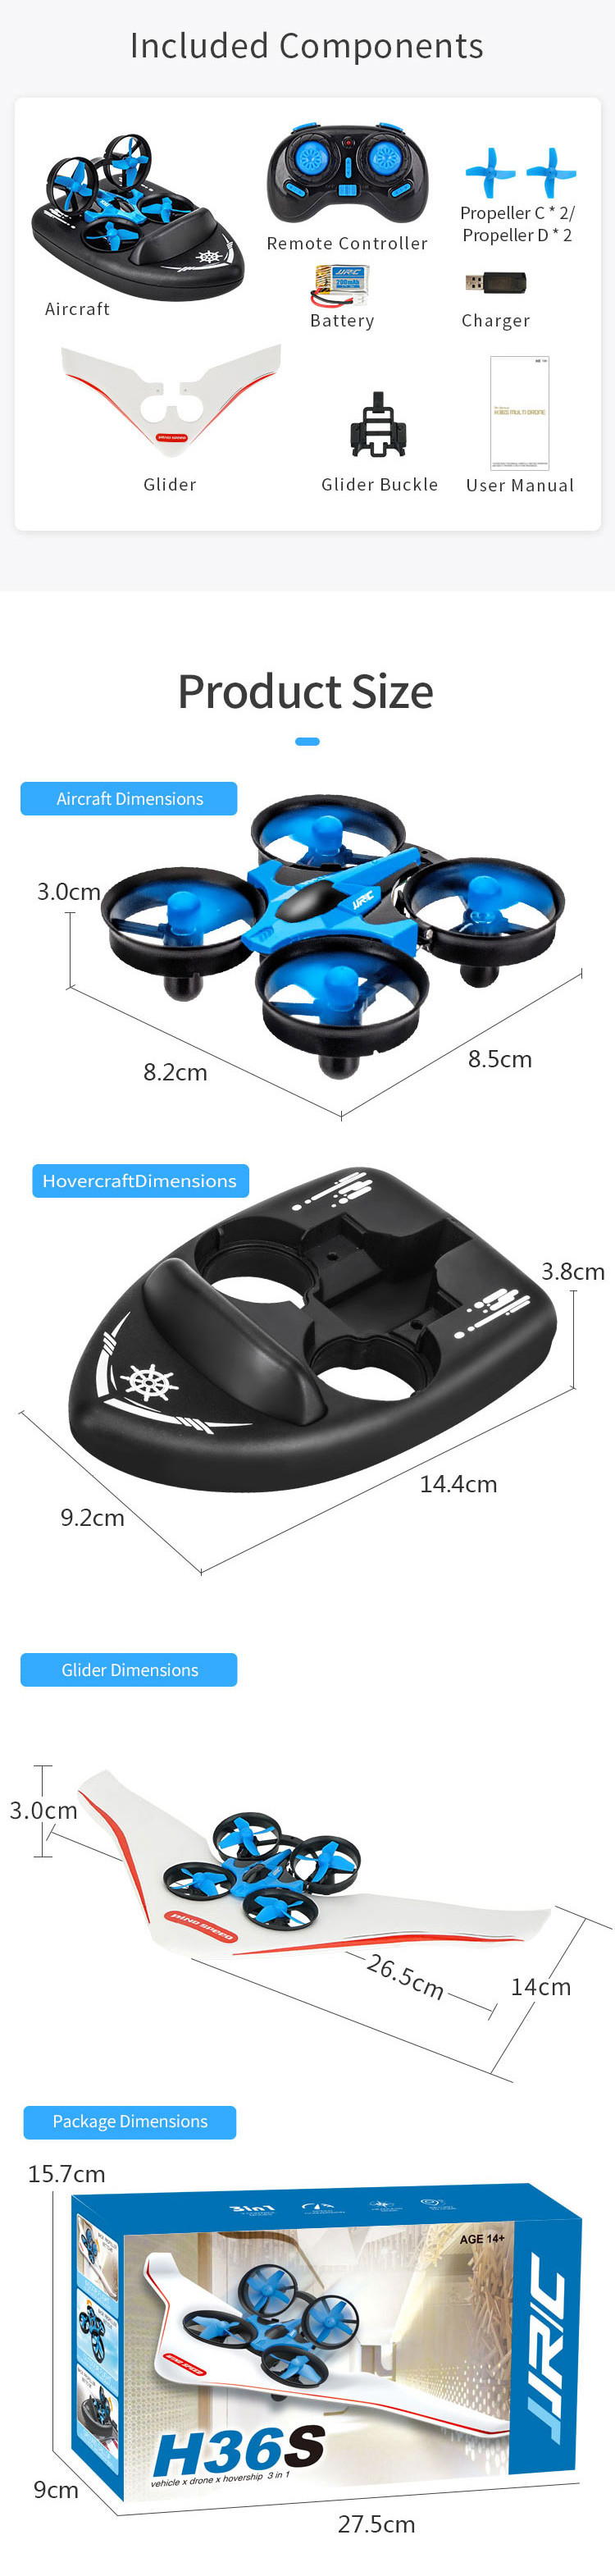 JJRC H36S 2.4G 4 In1 Flying Drone Land Driving Boat Glidering Detachable Quadcopter RTF 25